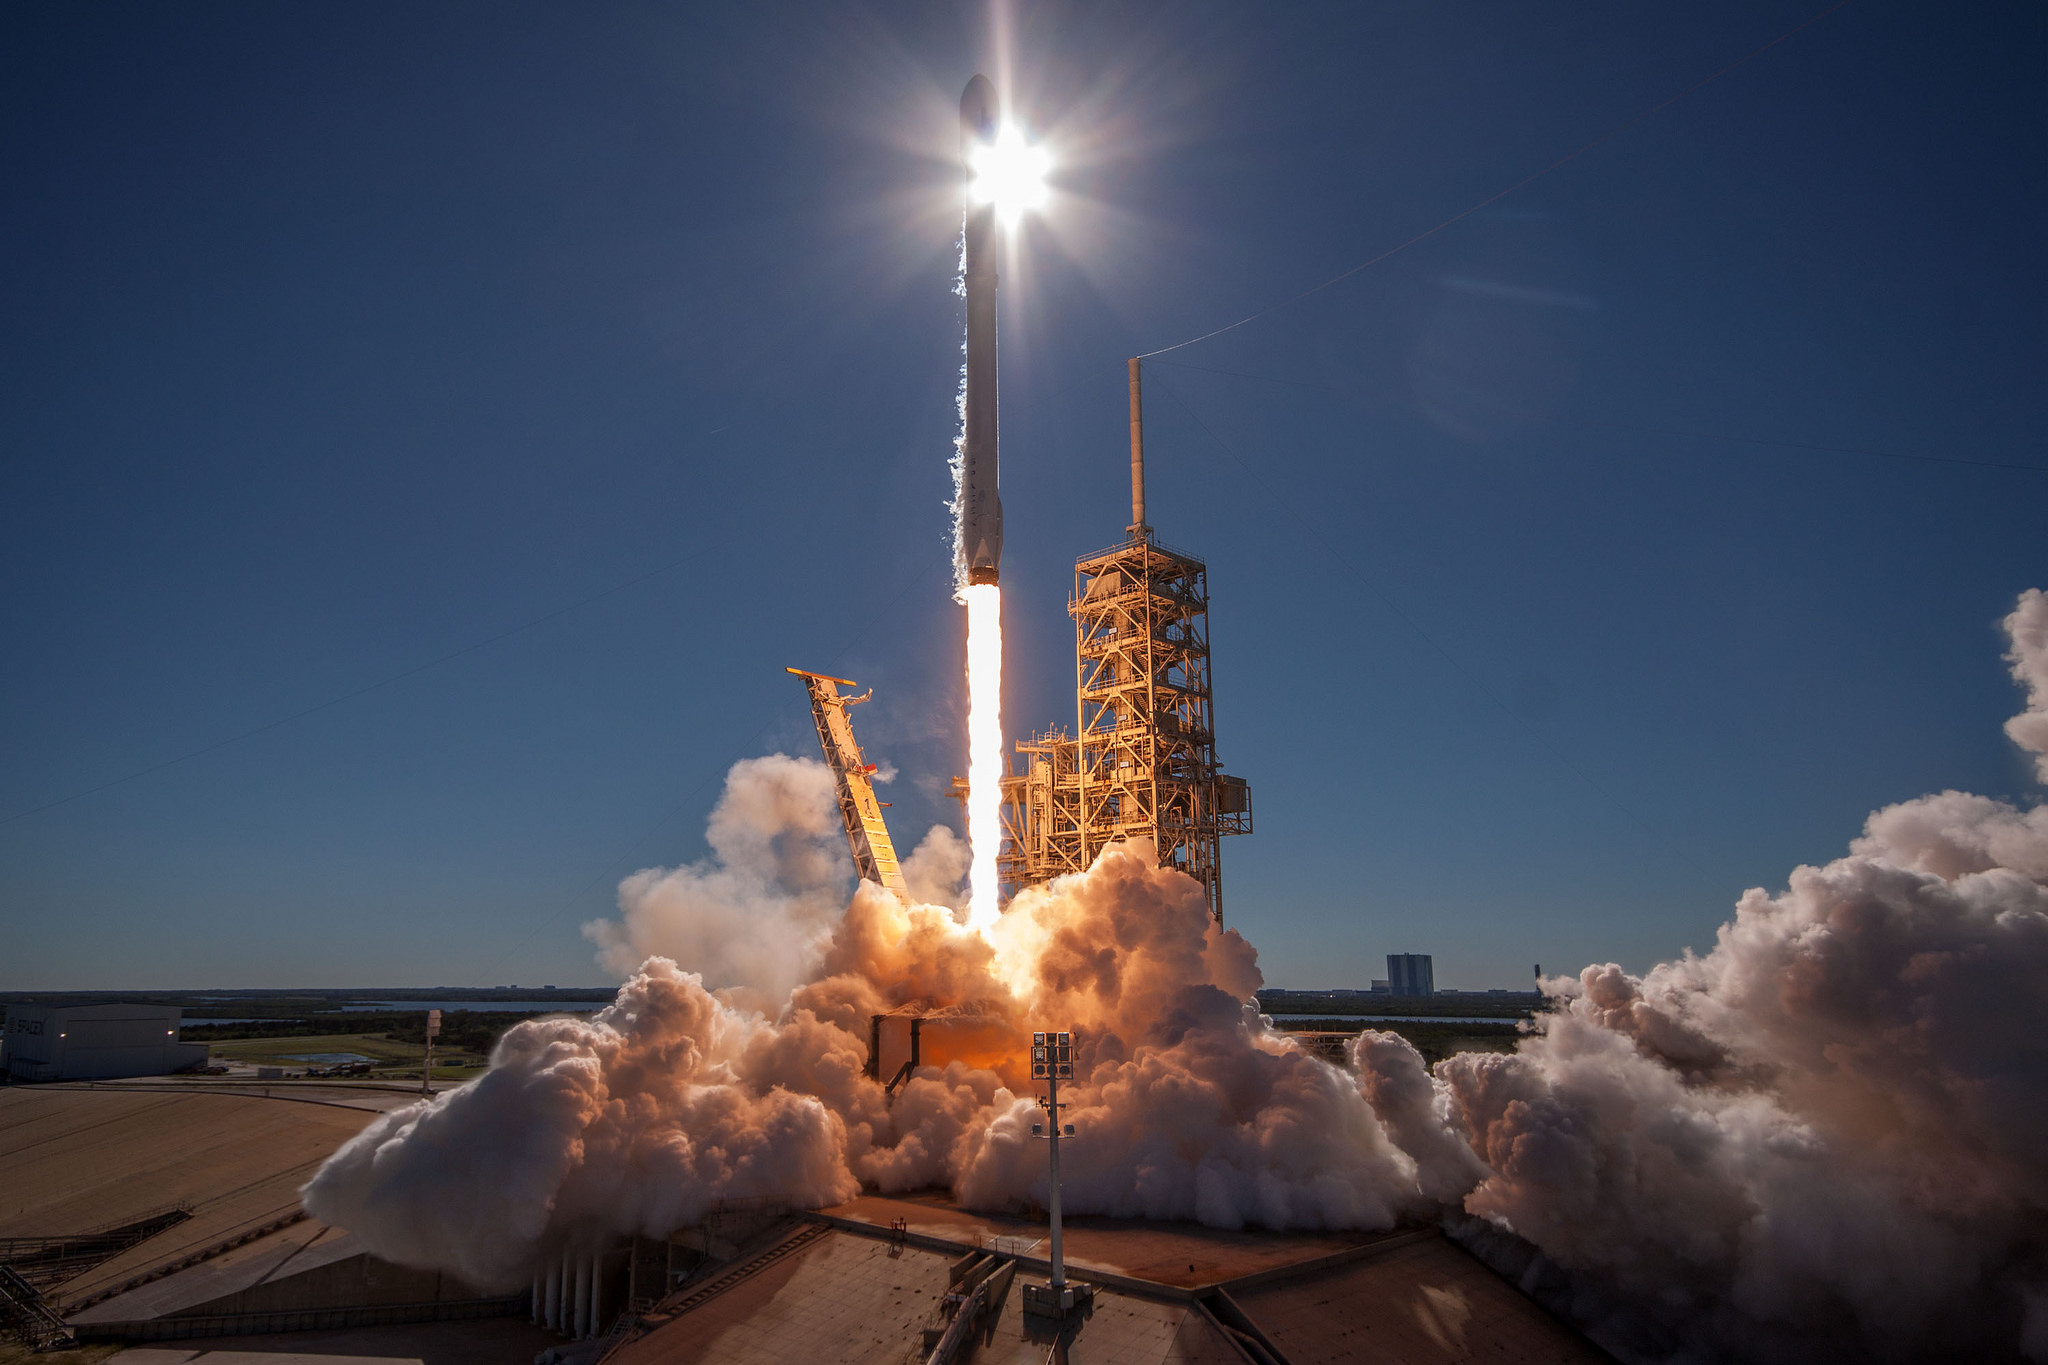 Breitbart, other conservative outlets escalate anti-SpaceX ...
